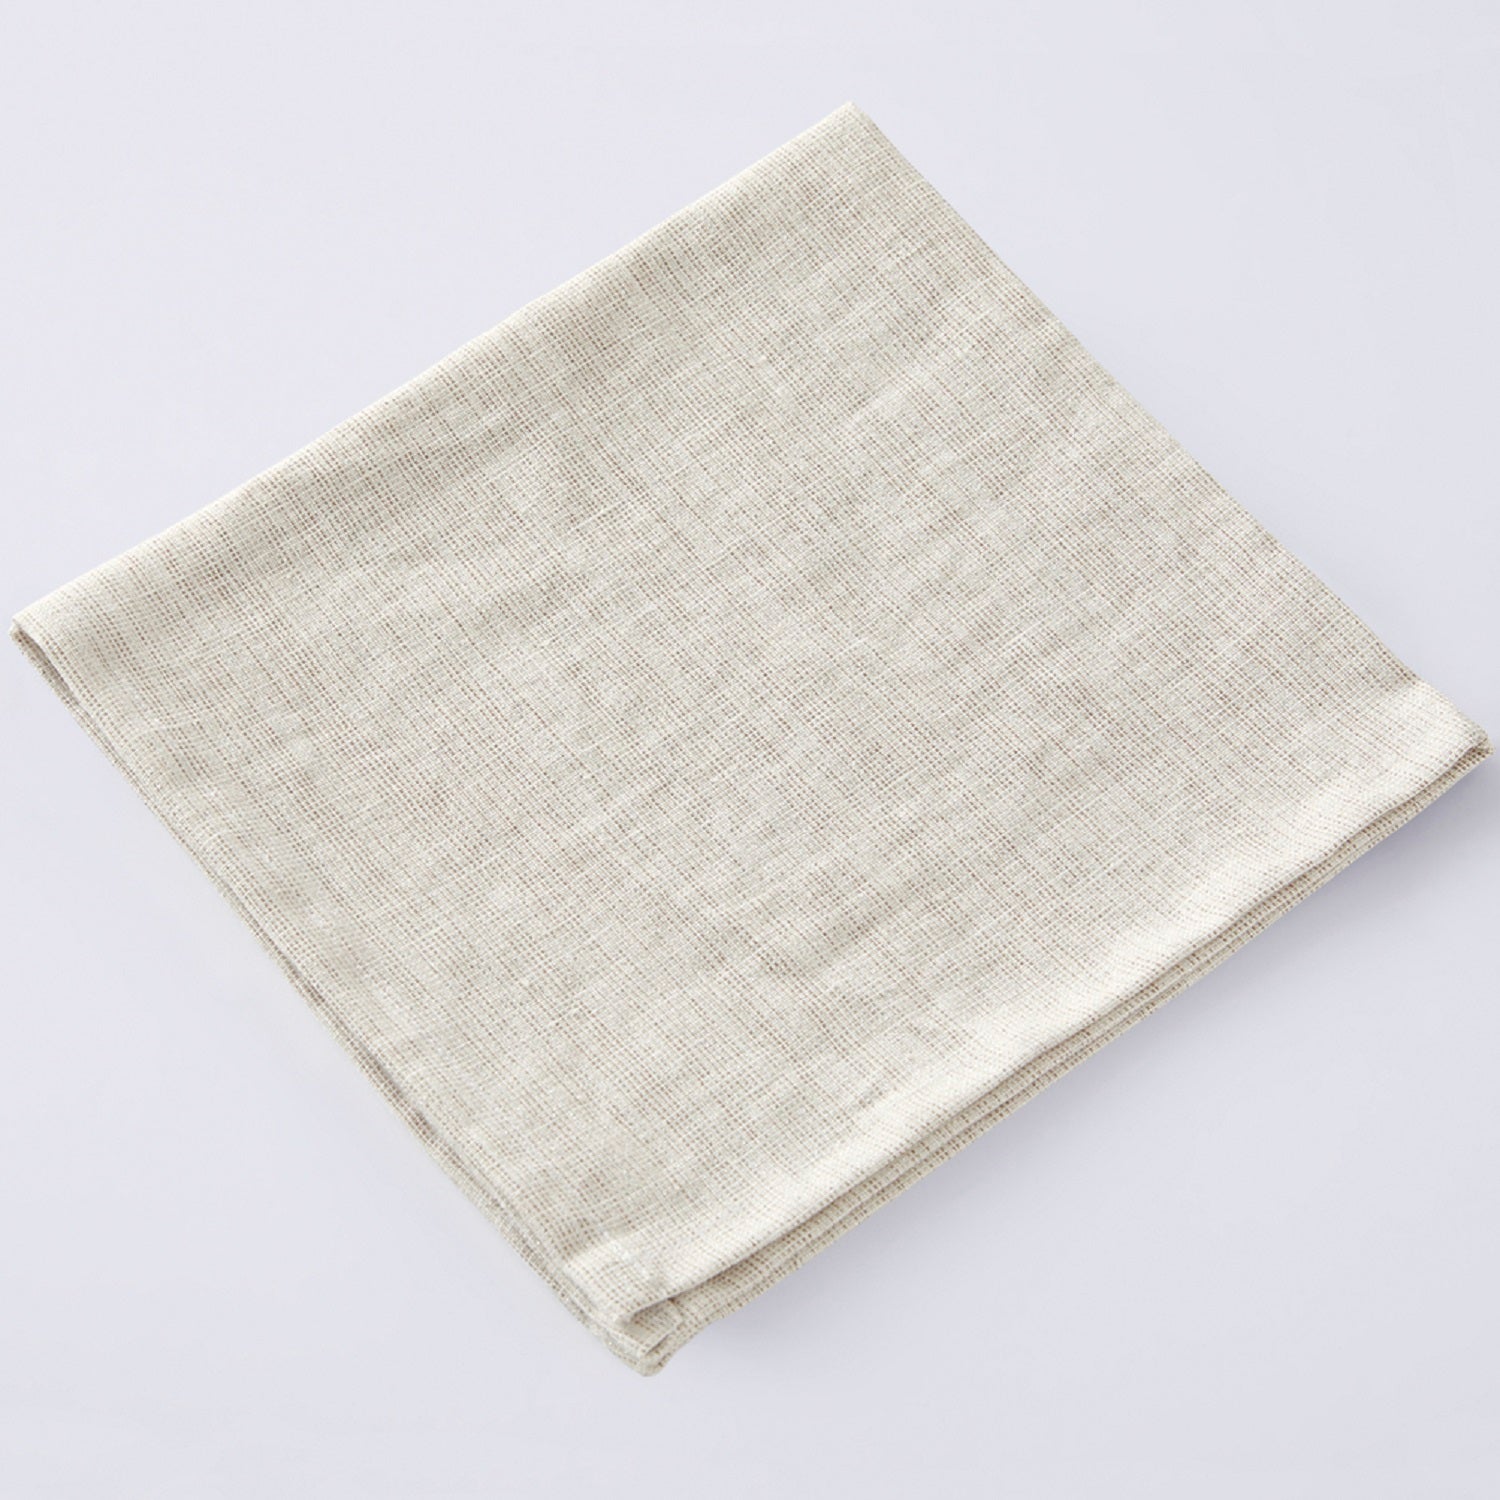 Charvet Editions "Sirius" (Gypse), Woven linen & mix sparkle napkin. Made in France.